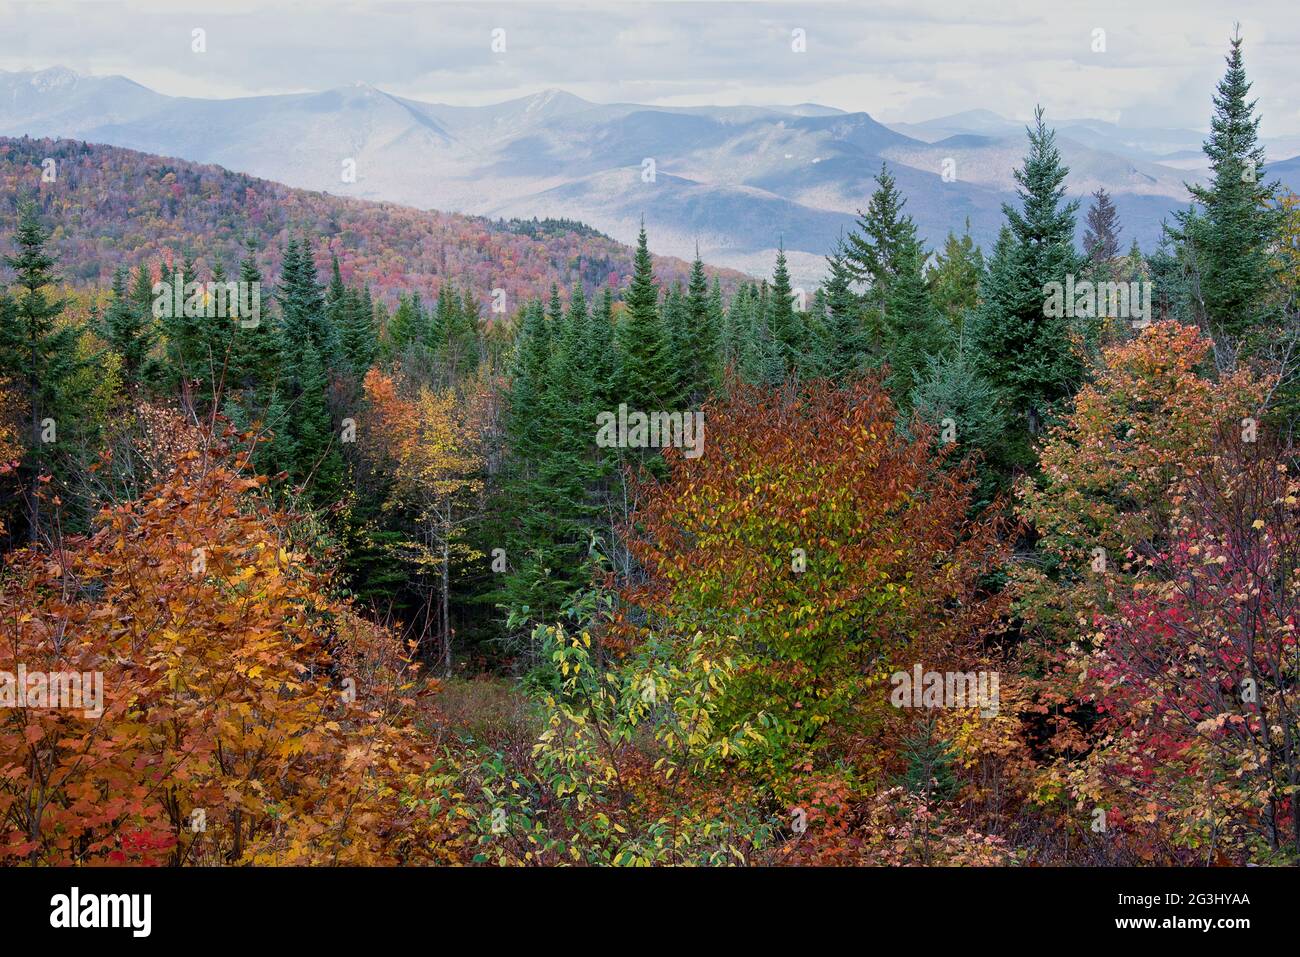 Autumn in White Mountains of New Hampshire. Uplifting scenic view of colorful fall foliage, tall evergreen trees, and distant mountain peaks. Stock Photo